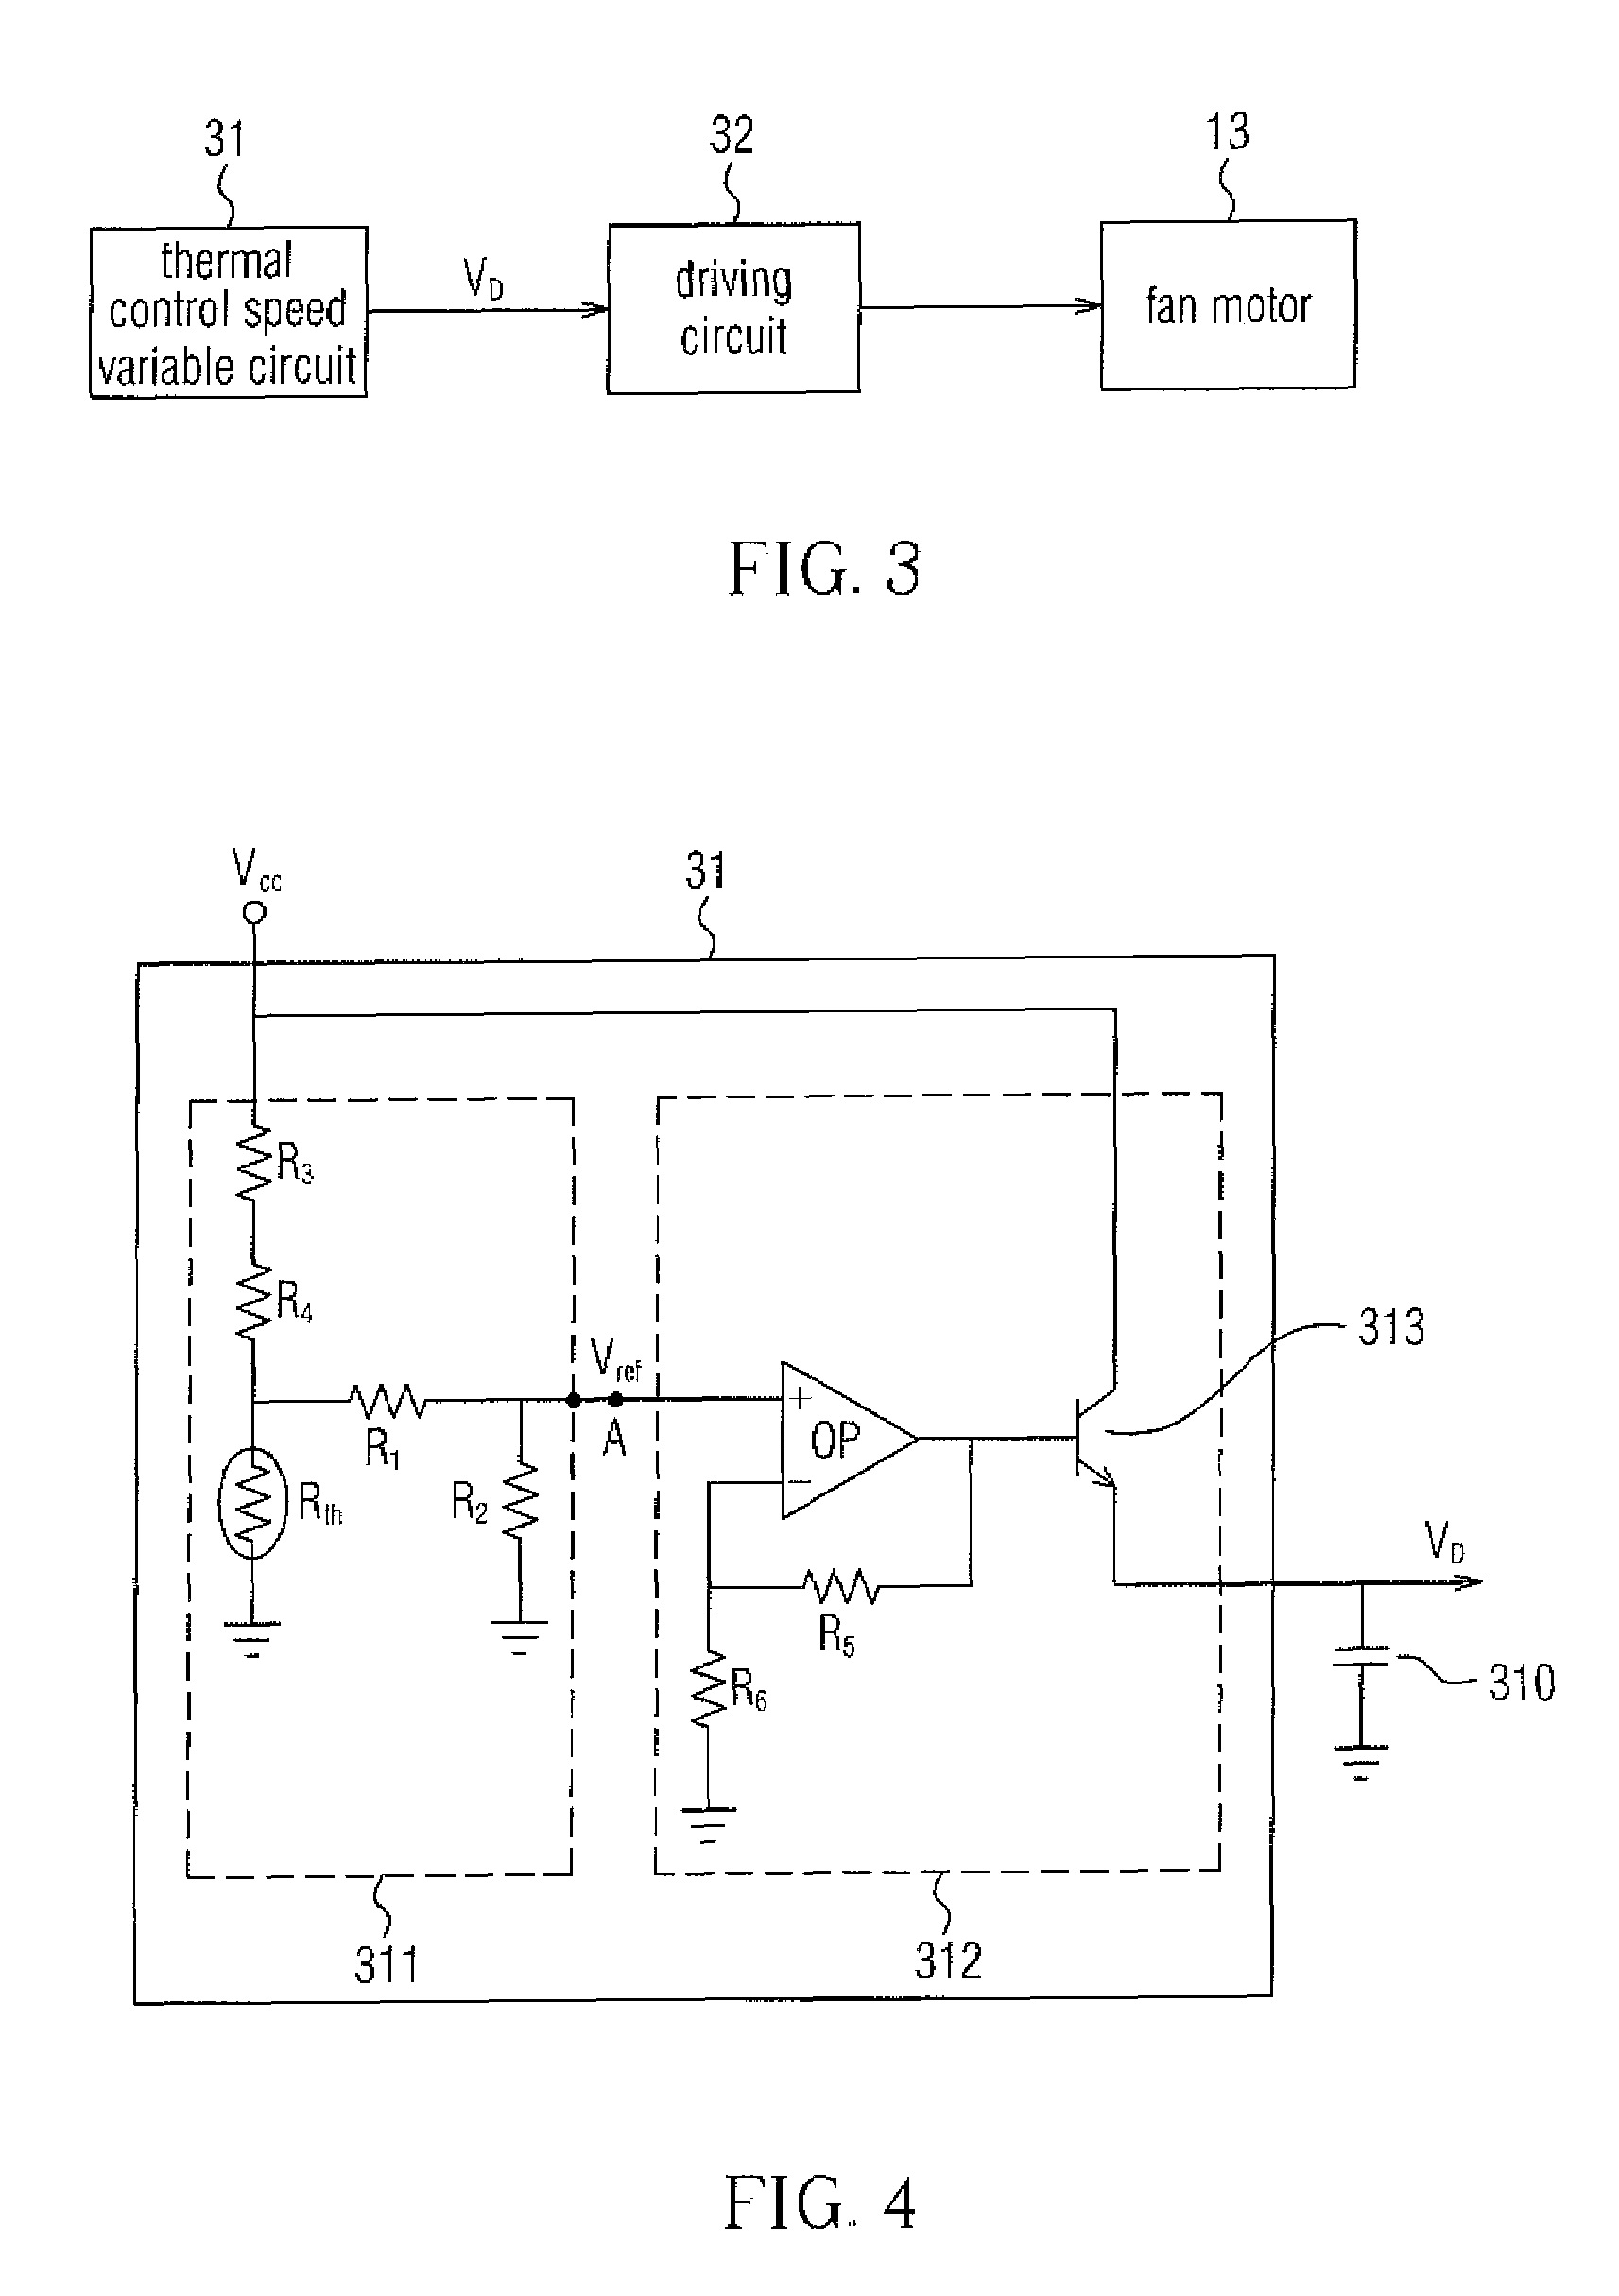 Thermal control variable-speed circuit without switching noise